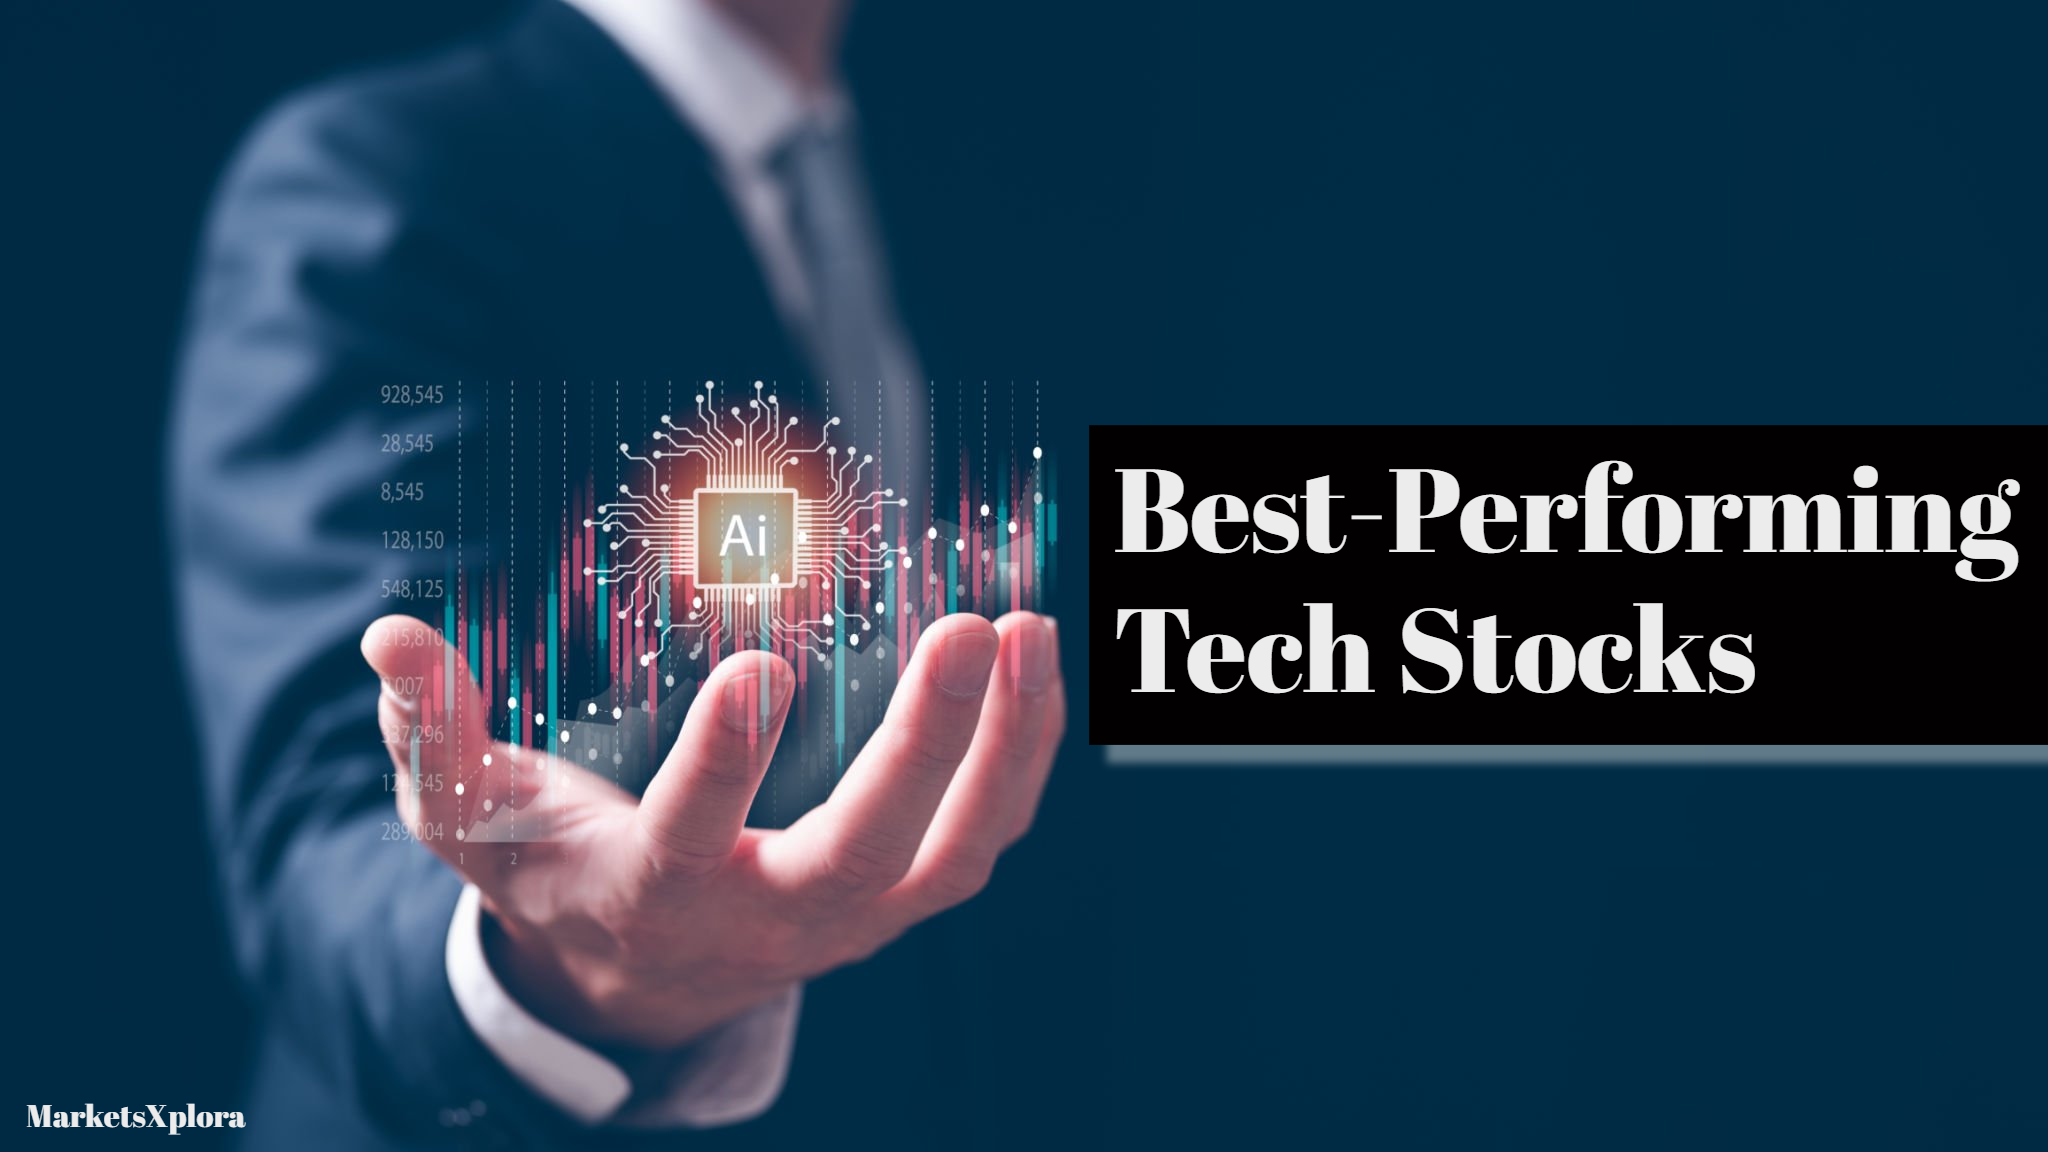 Invest in the future with the best tech stocks for 2024. This must-read article showcases 5 innovative industry leaders that are dominating the market.